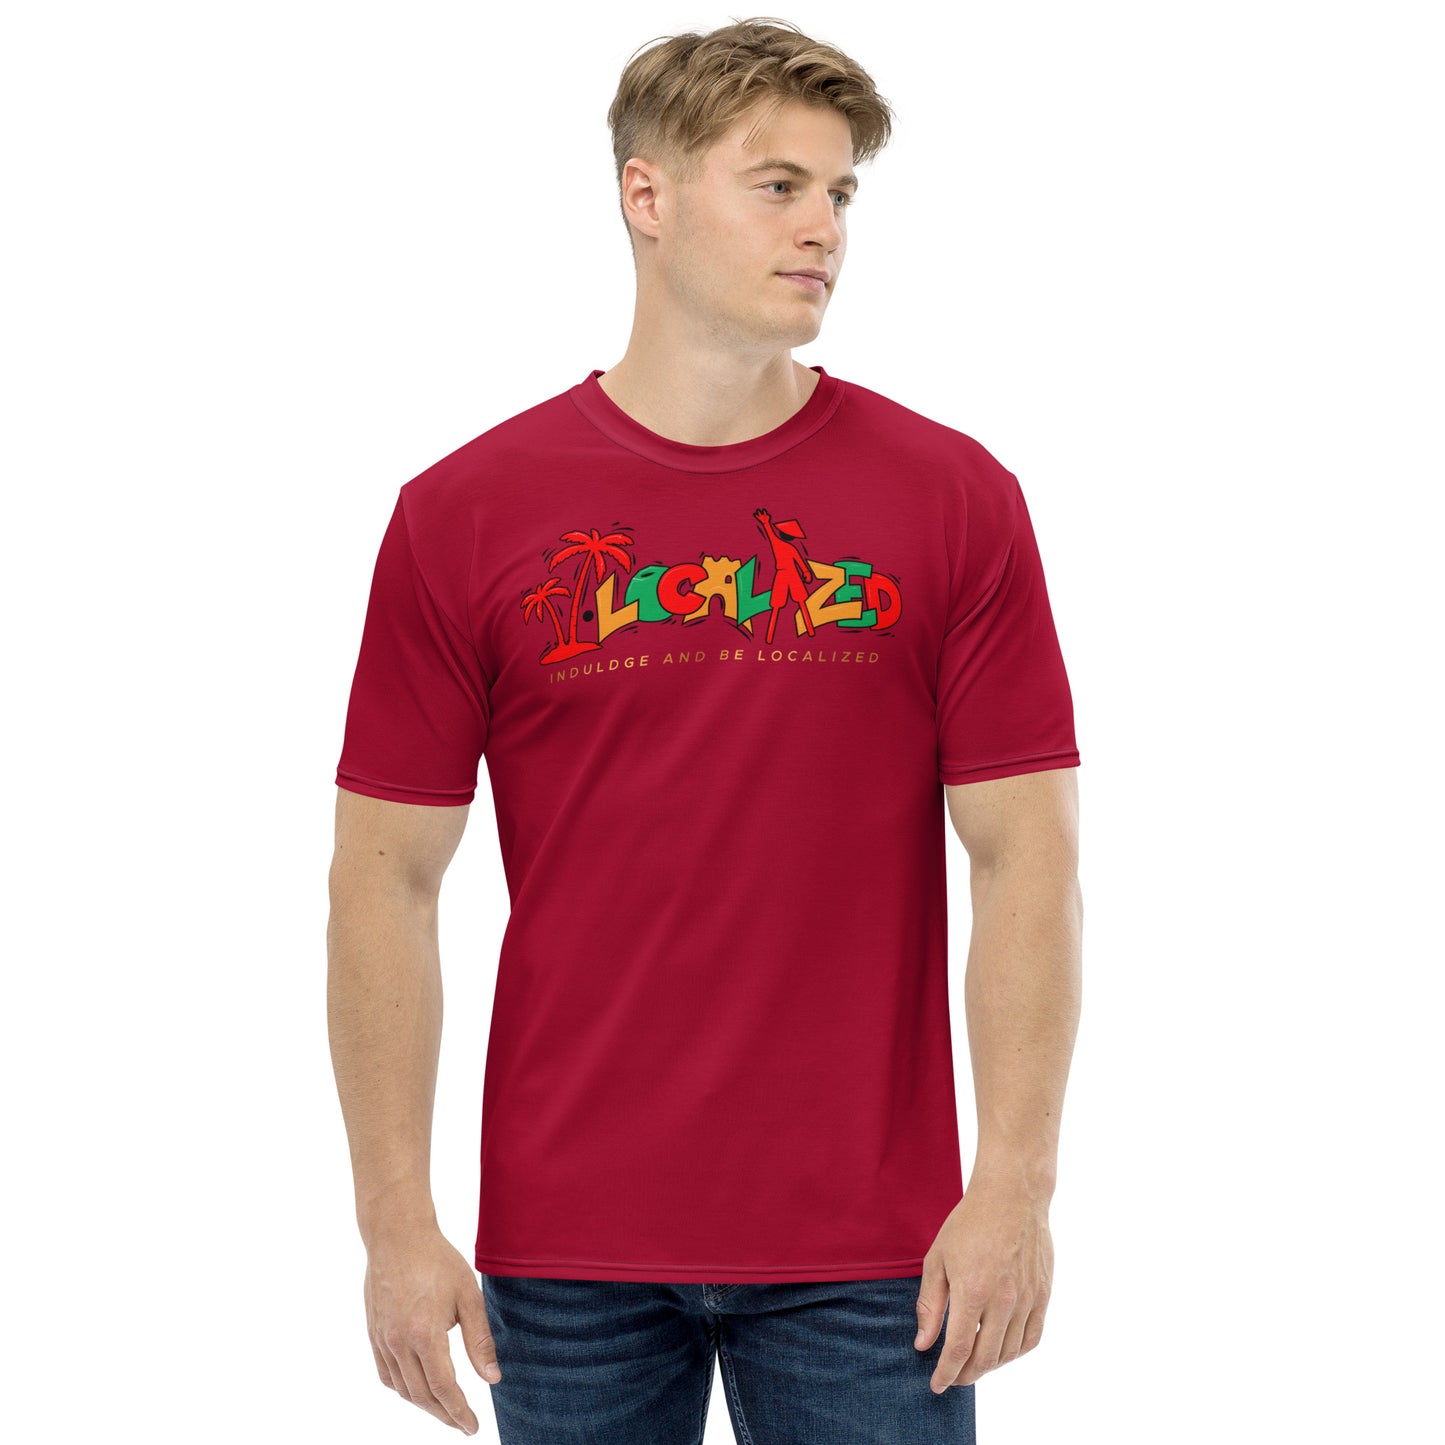 Maroon V.Localized (Ice/Gold/Green) Men’s Dry-Fit T-shirt